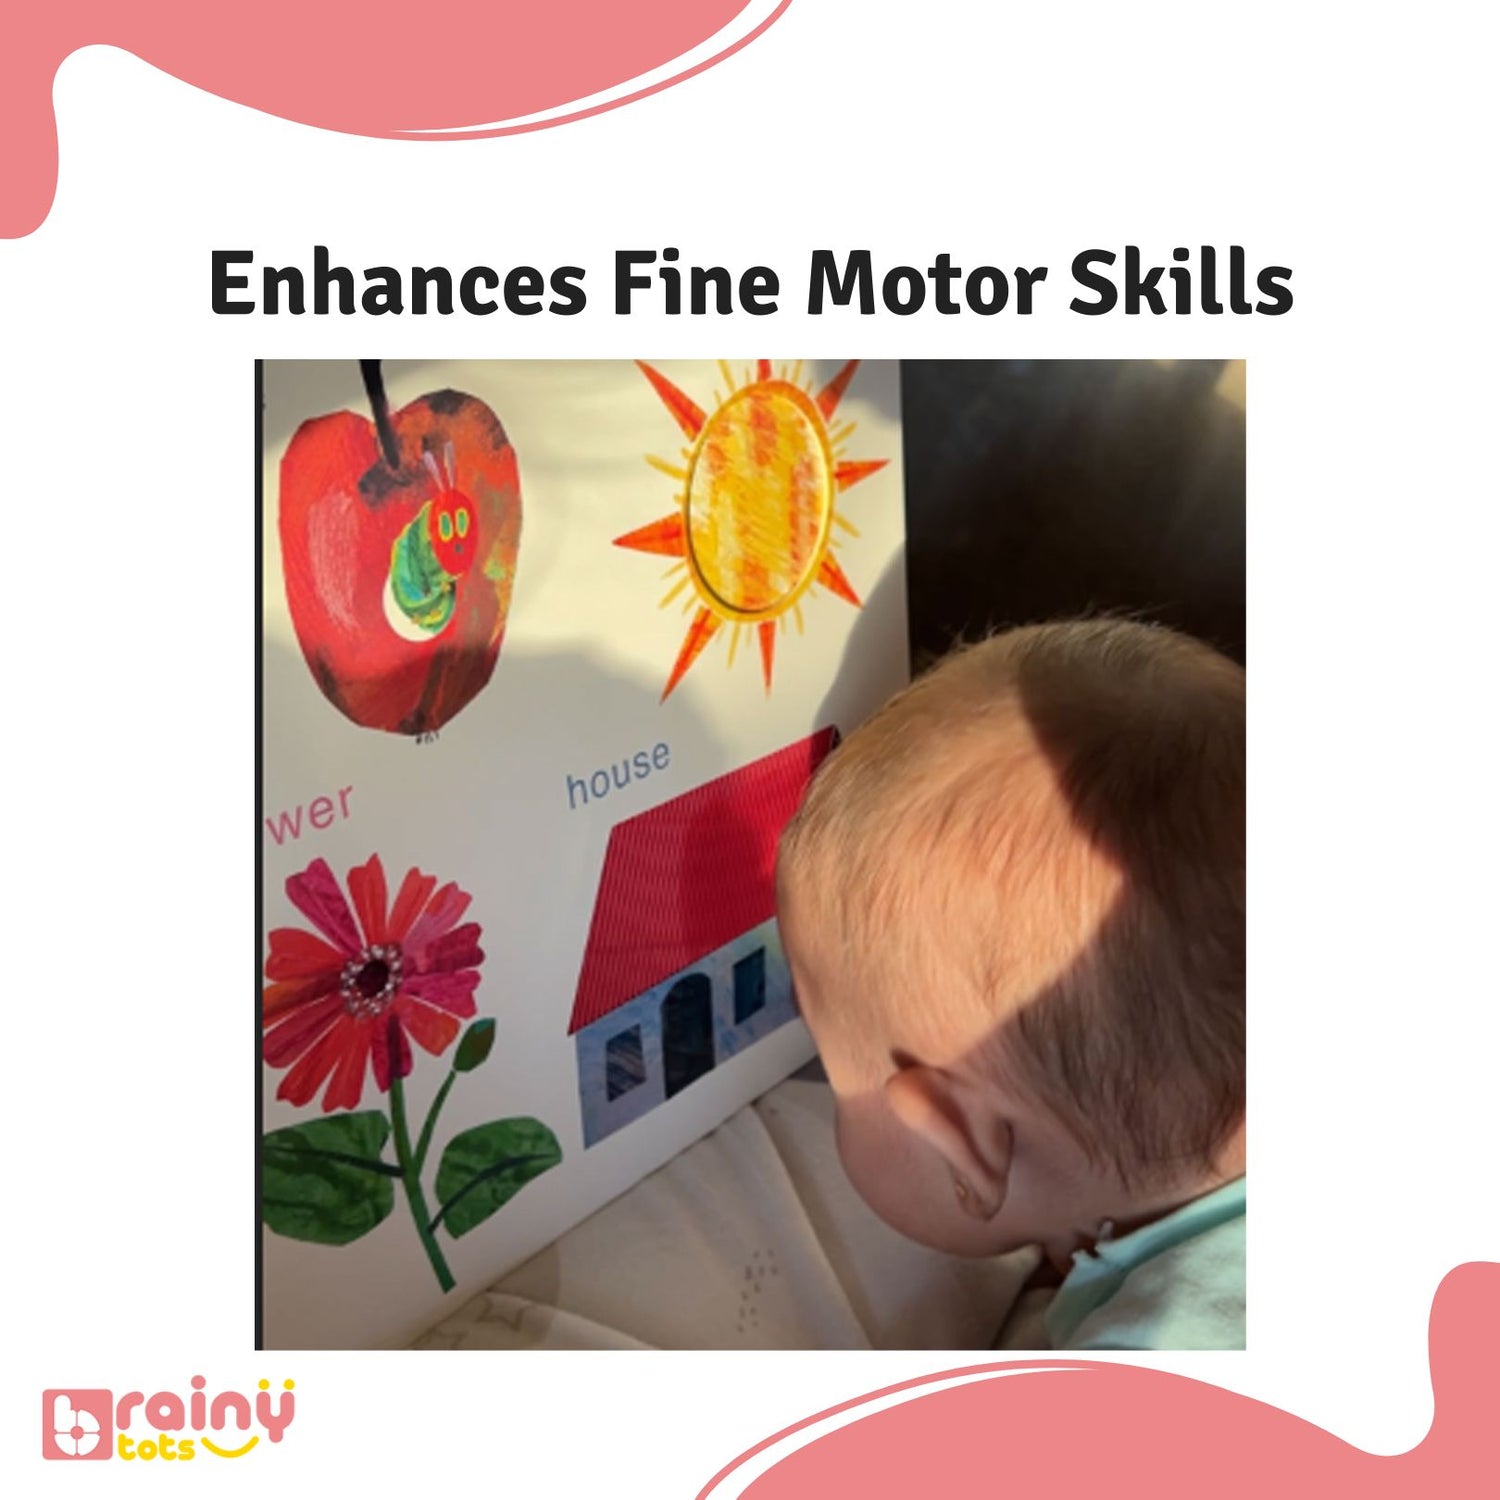 Enhance fine motor skills with our Touch and Feel Playbook. Designed with interactive textures and activities, this tactile learning tool provides an engaging way for young readers to develop hand-eye coordination and dexterity, fostering essential motor skills for early childhood development.